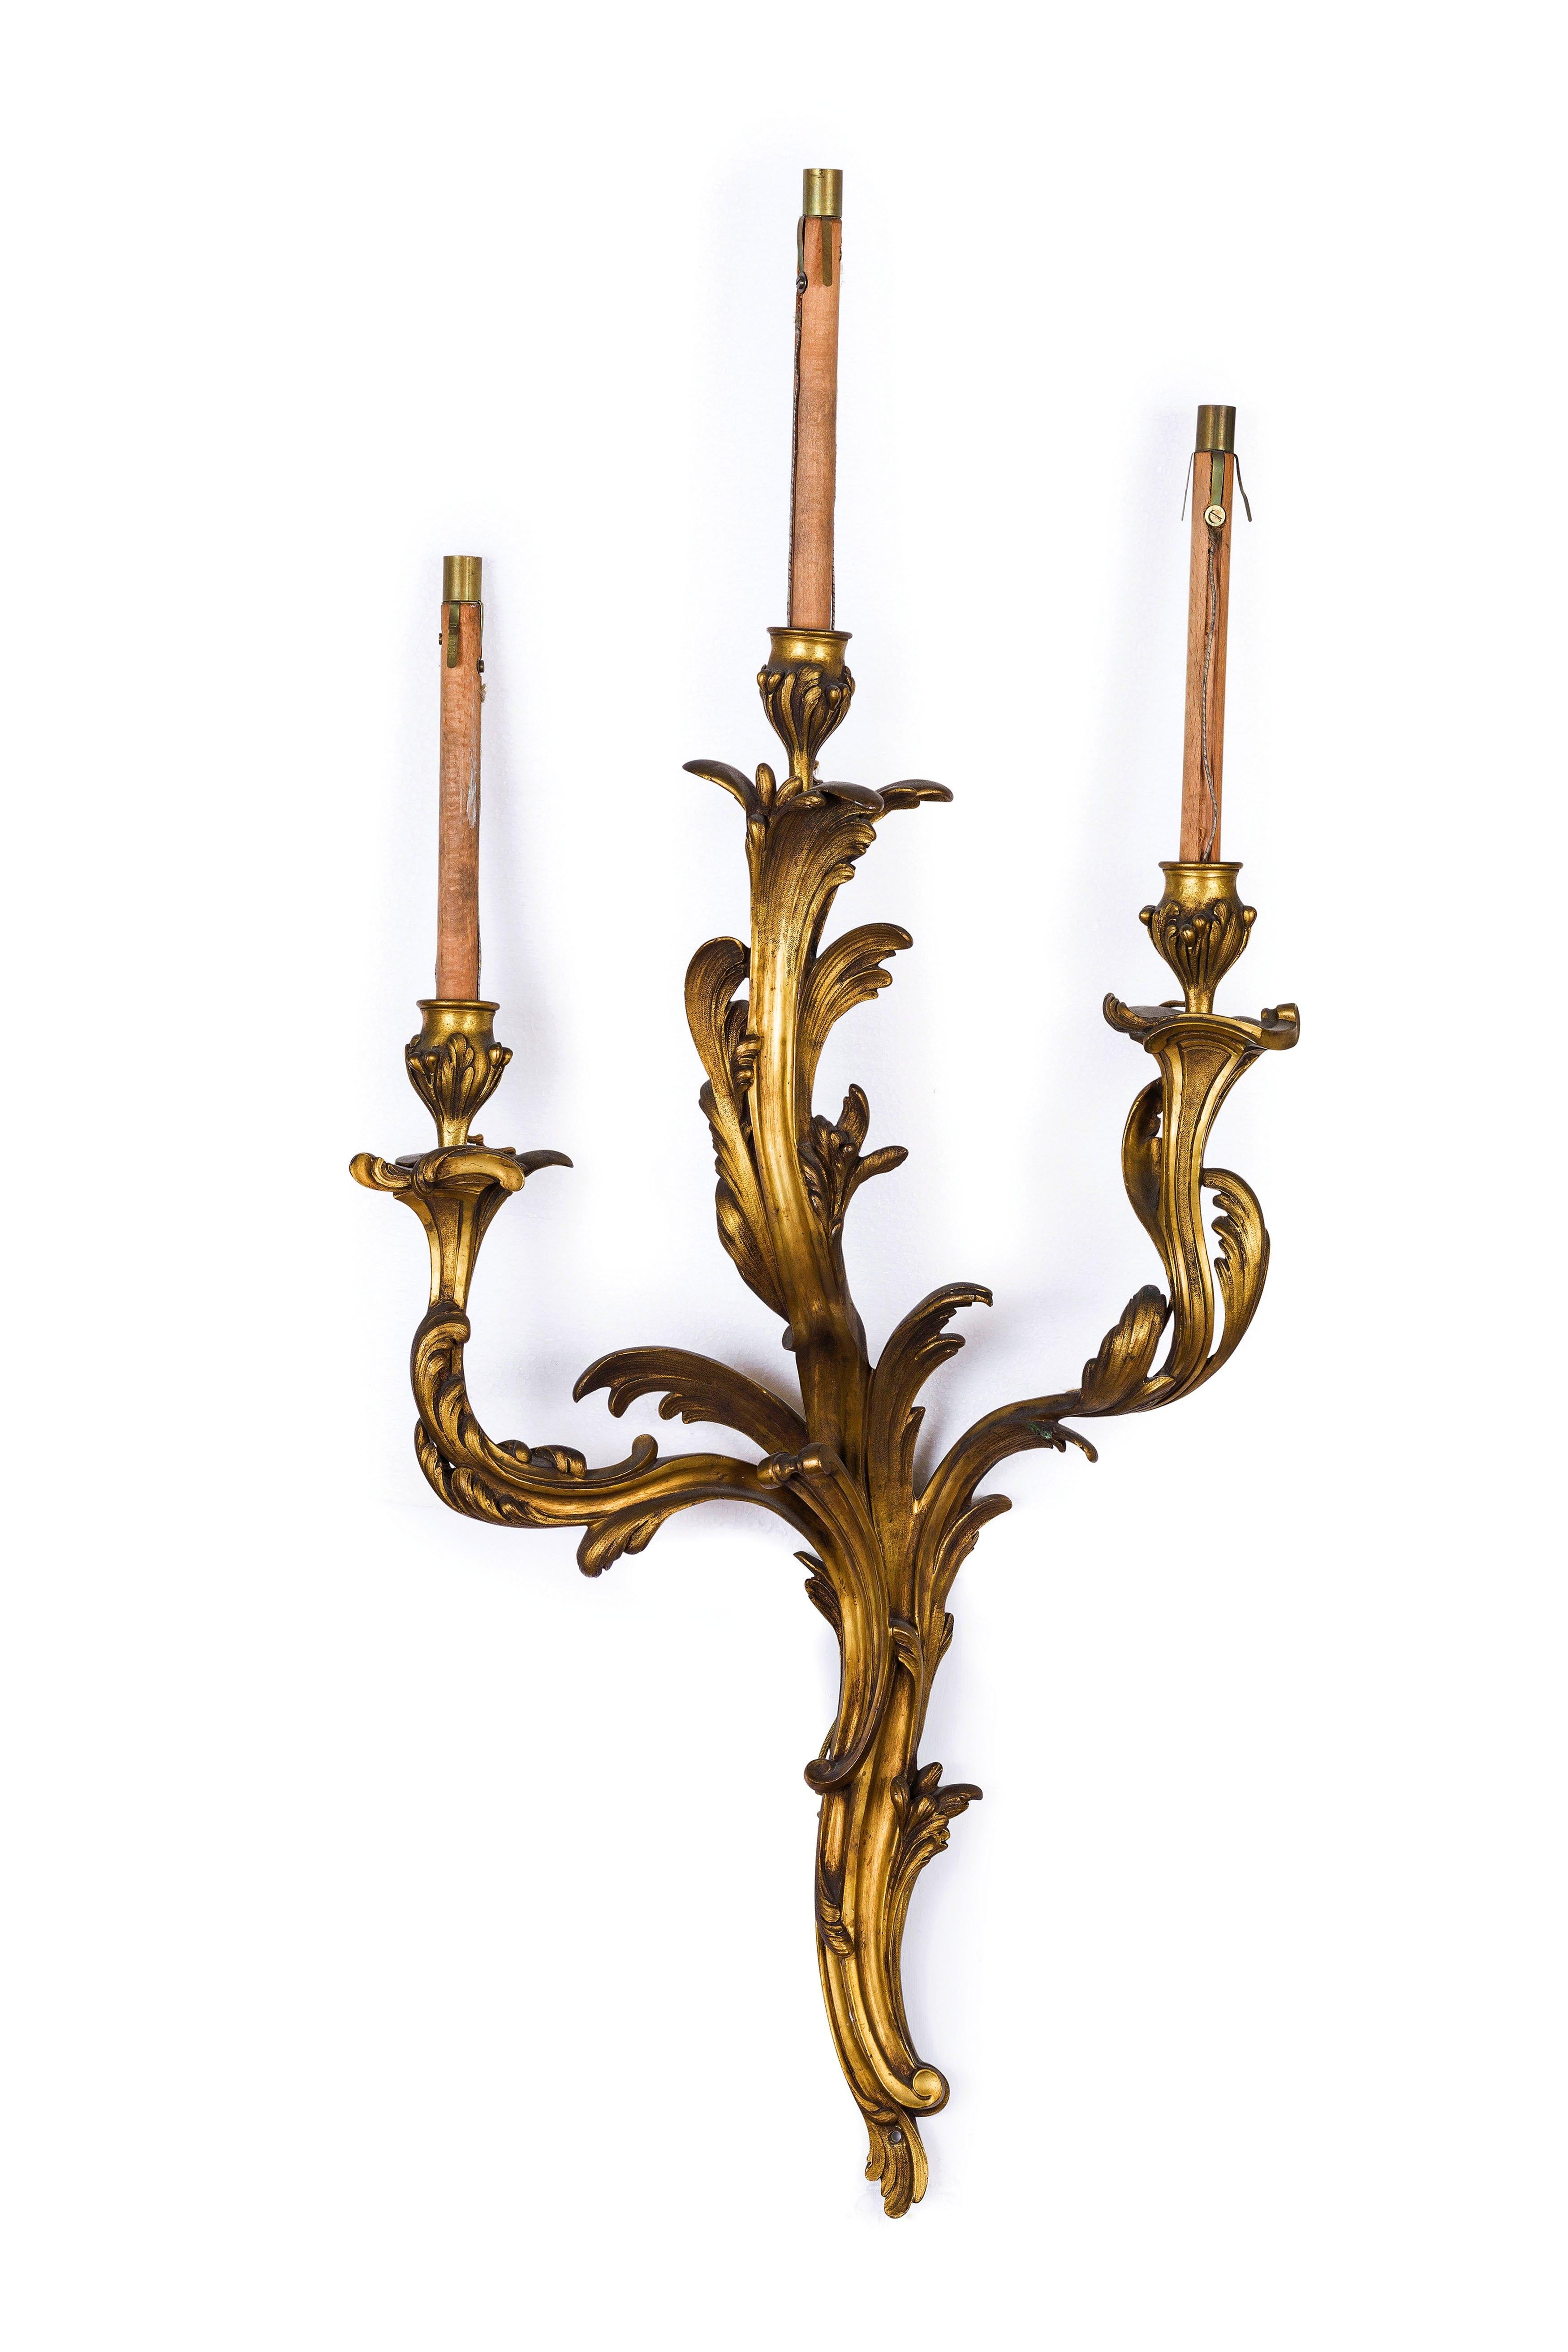 19th century, four three-light French gilt bronze wall sconces

These four large three-light wall lamps were made, in chiselled gilt bronze, in the late 19th century in France. Stylistically (Rocaille) they are inspired by the models of the famous